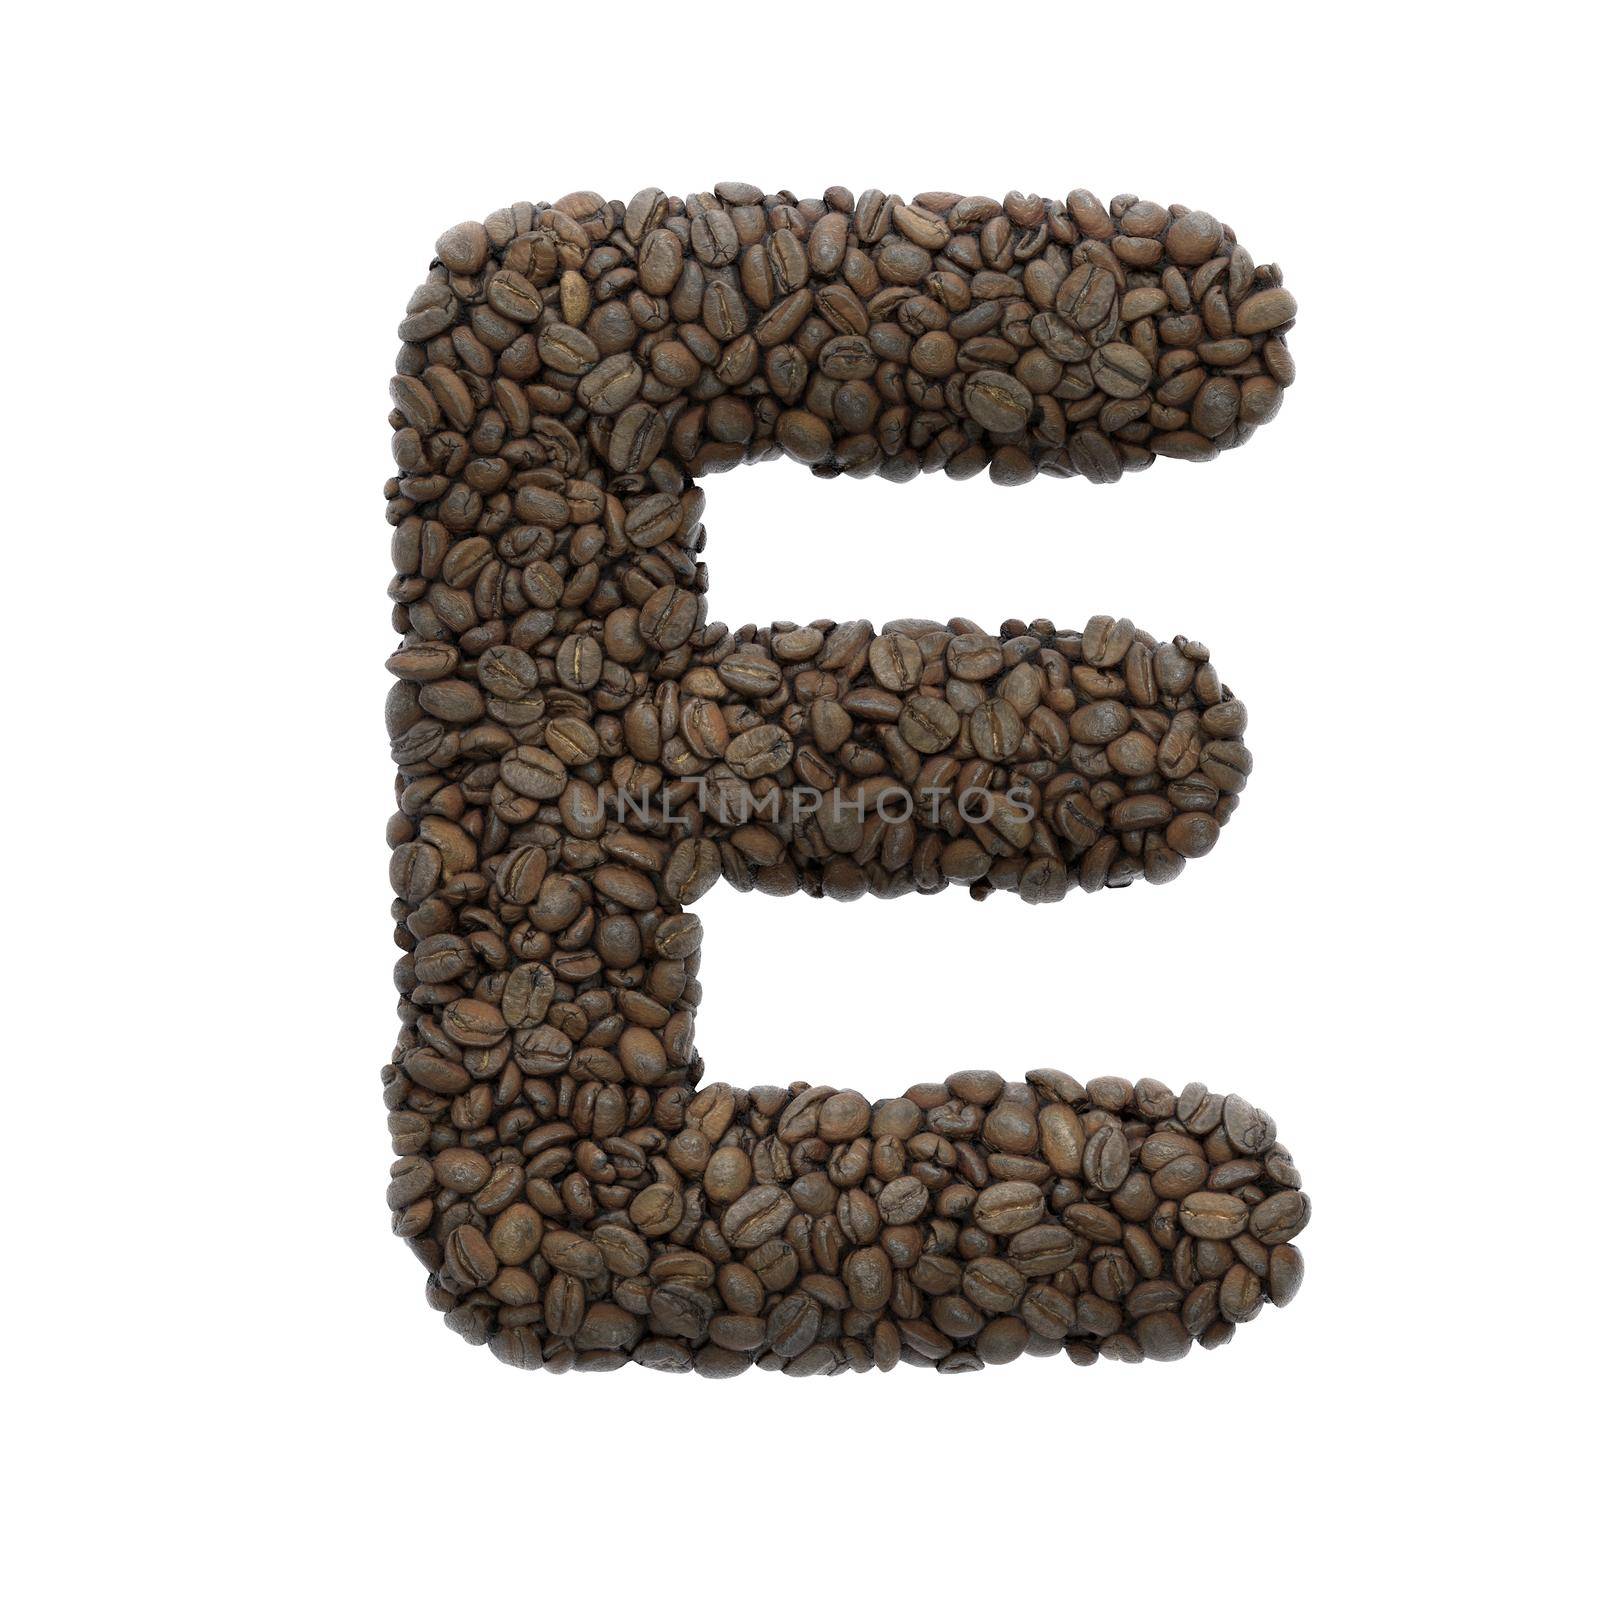 Coffee letter E - large 3d roasted beans font isolated on white background. This alphabet is perfect for creative illustrations related but not limited to Coffee, energy, insomnia...